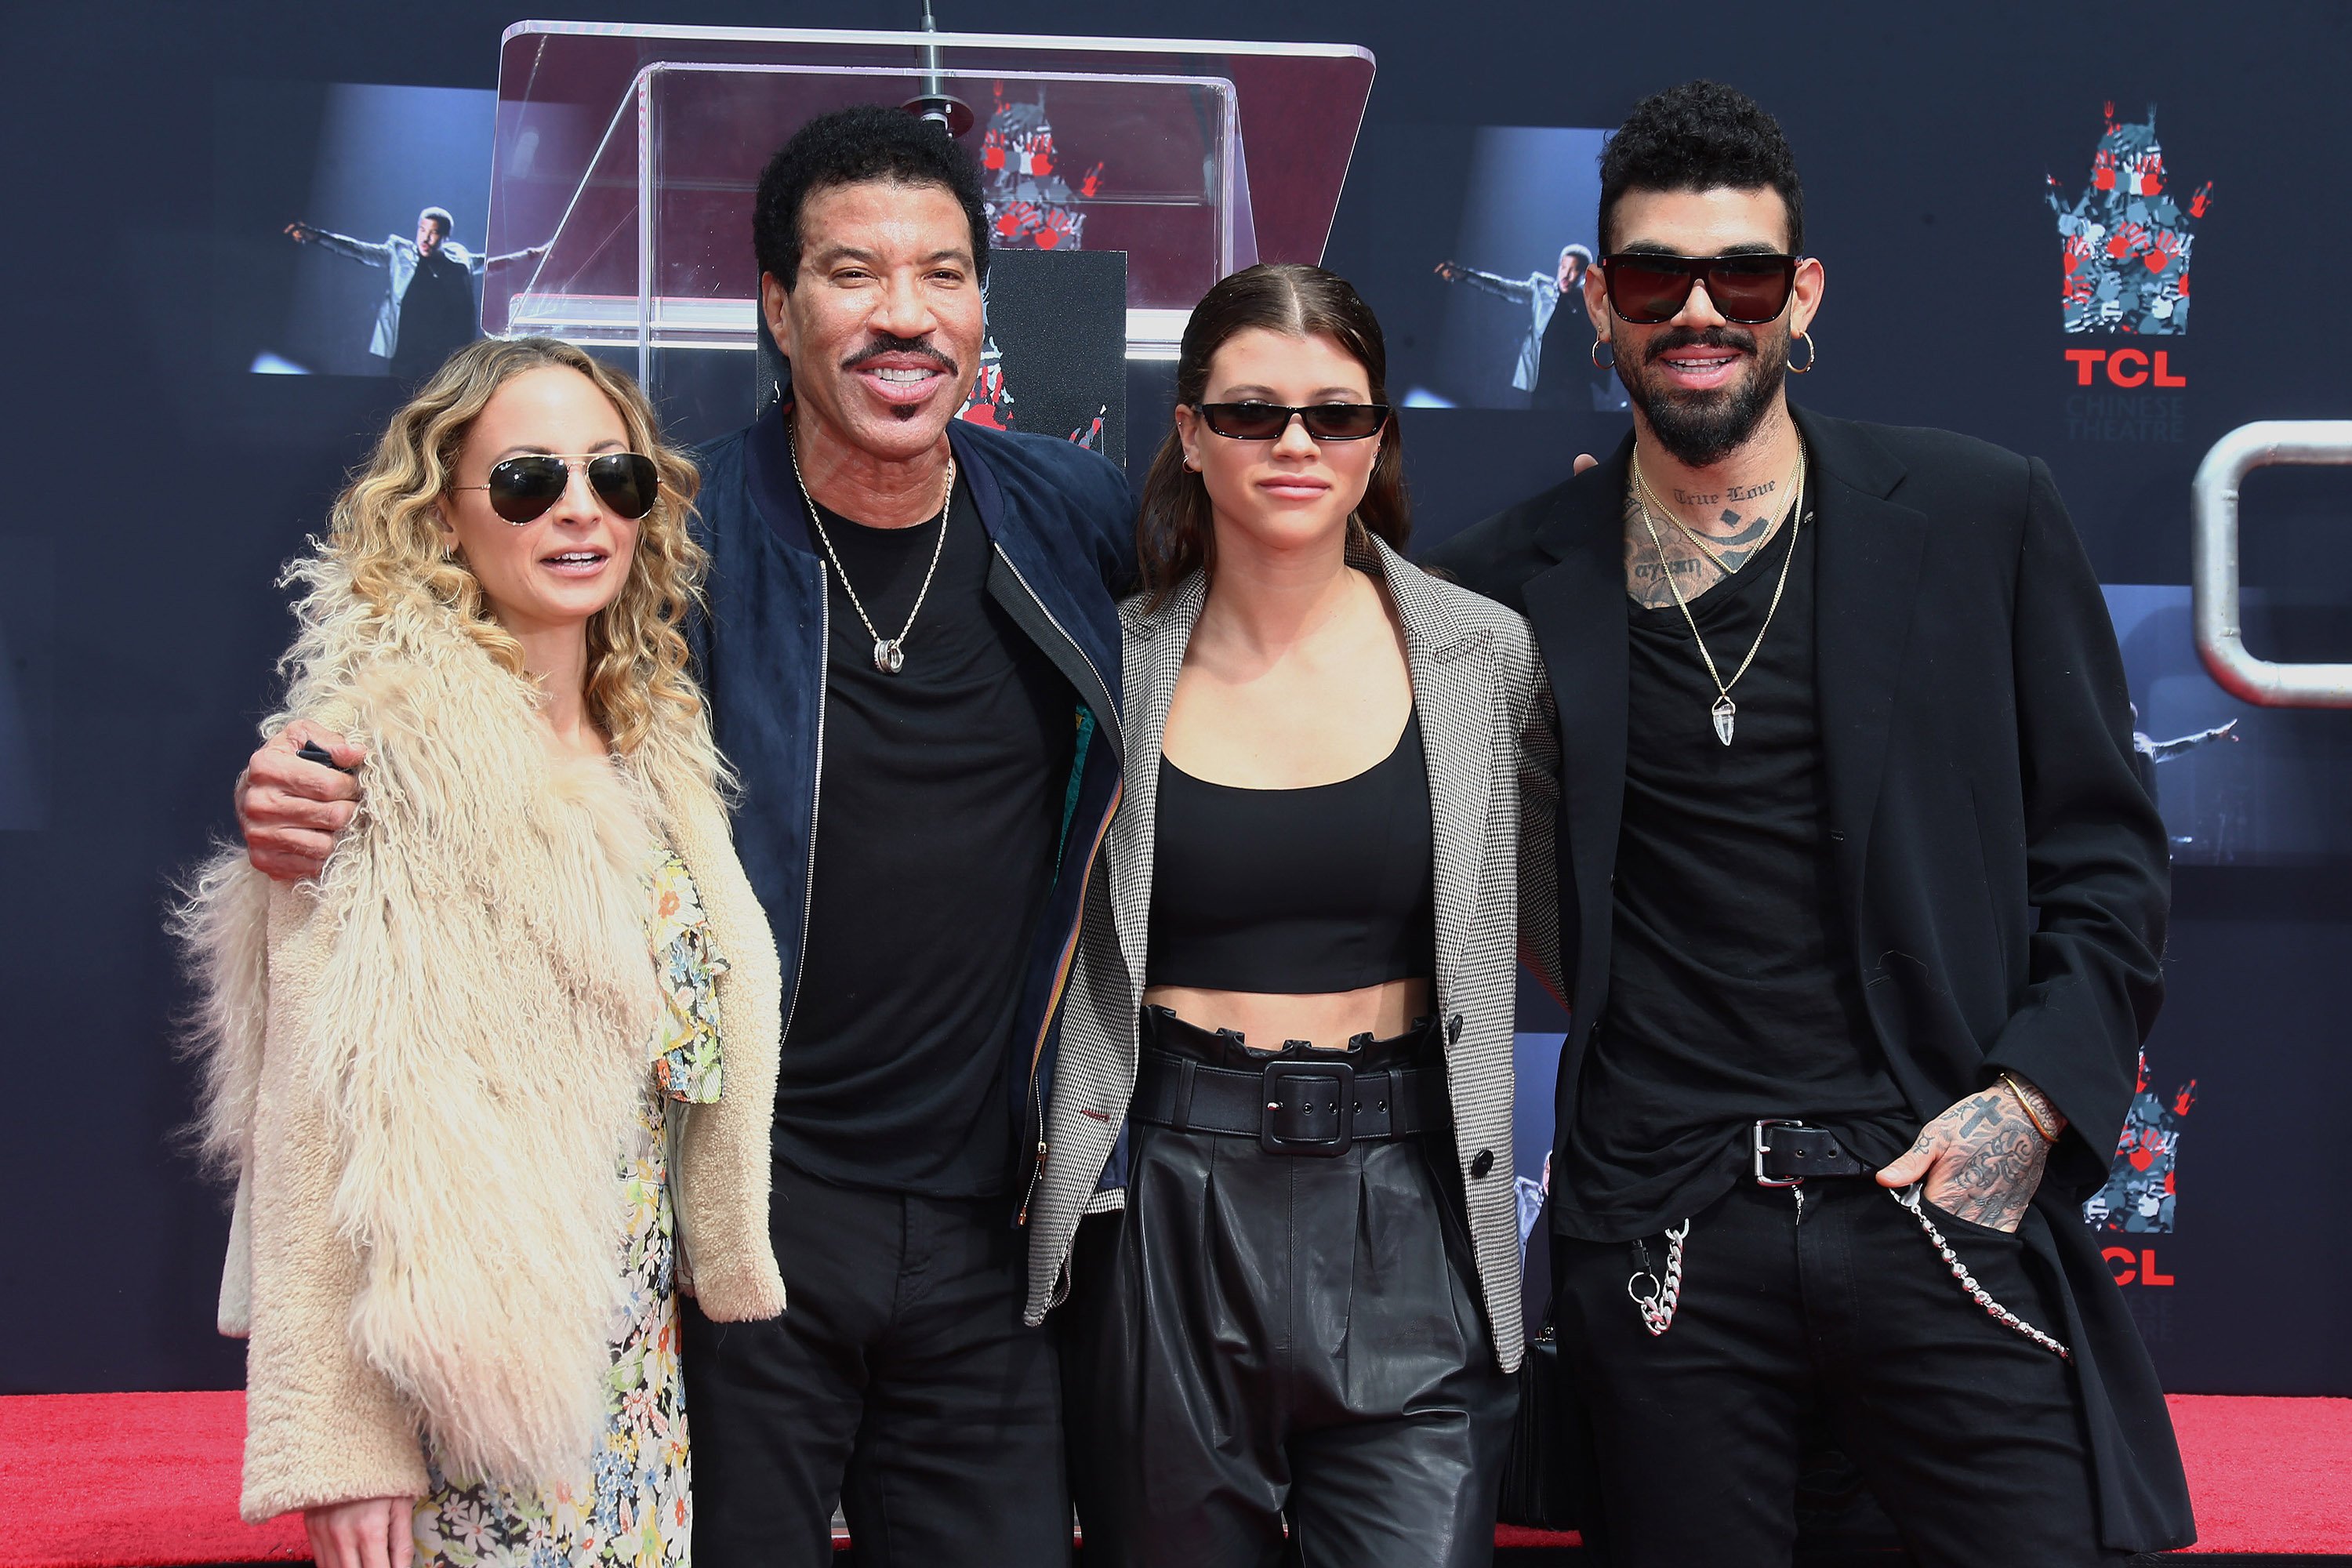 Nicole Richie, Lionel Richie, Sofia Richie, and Miles Richie at the Lionel Richie Hand And Footprint Ceremony on March 7, 2018 | Source: Getty Images